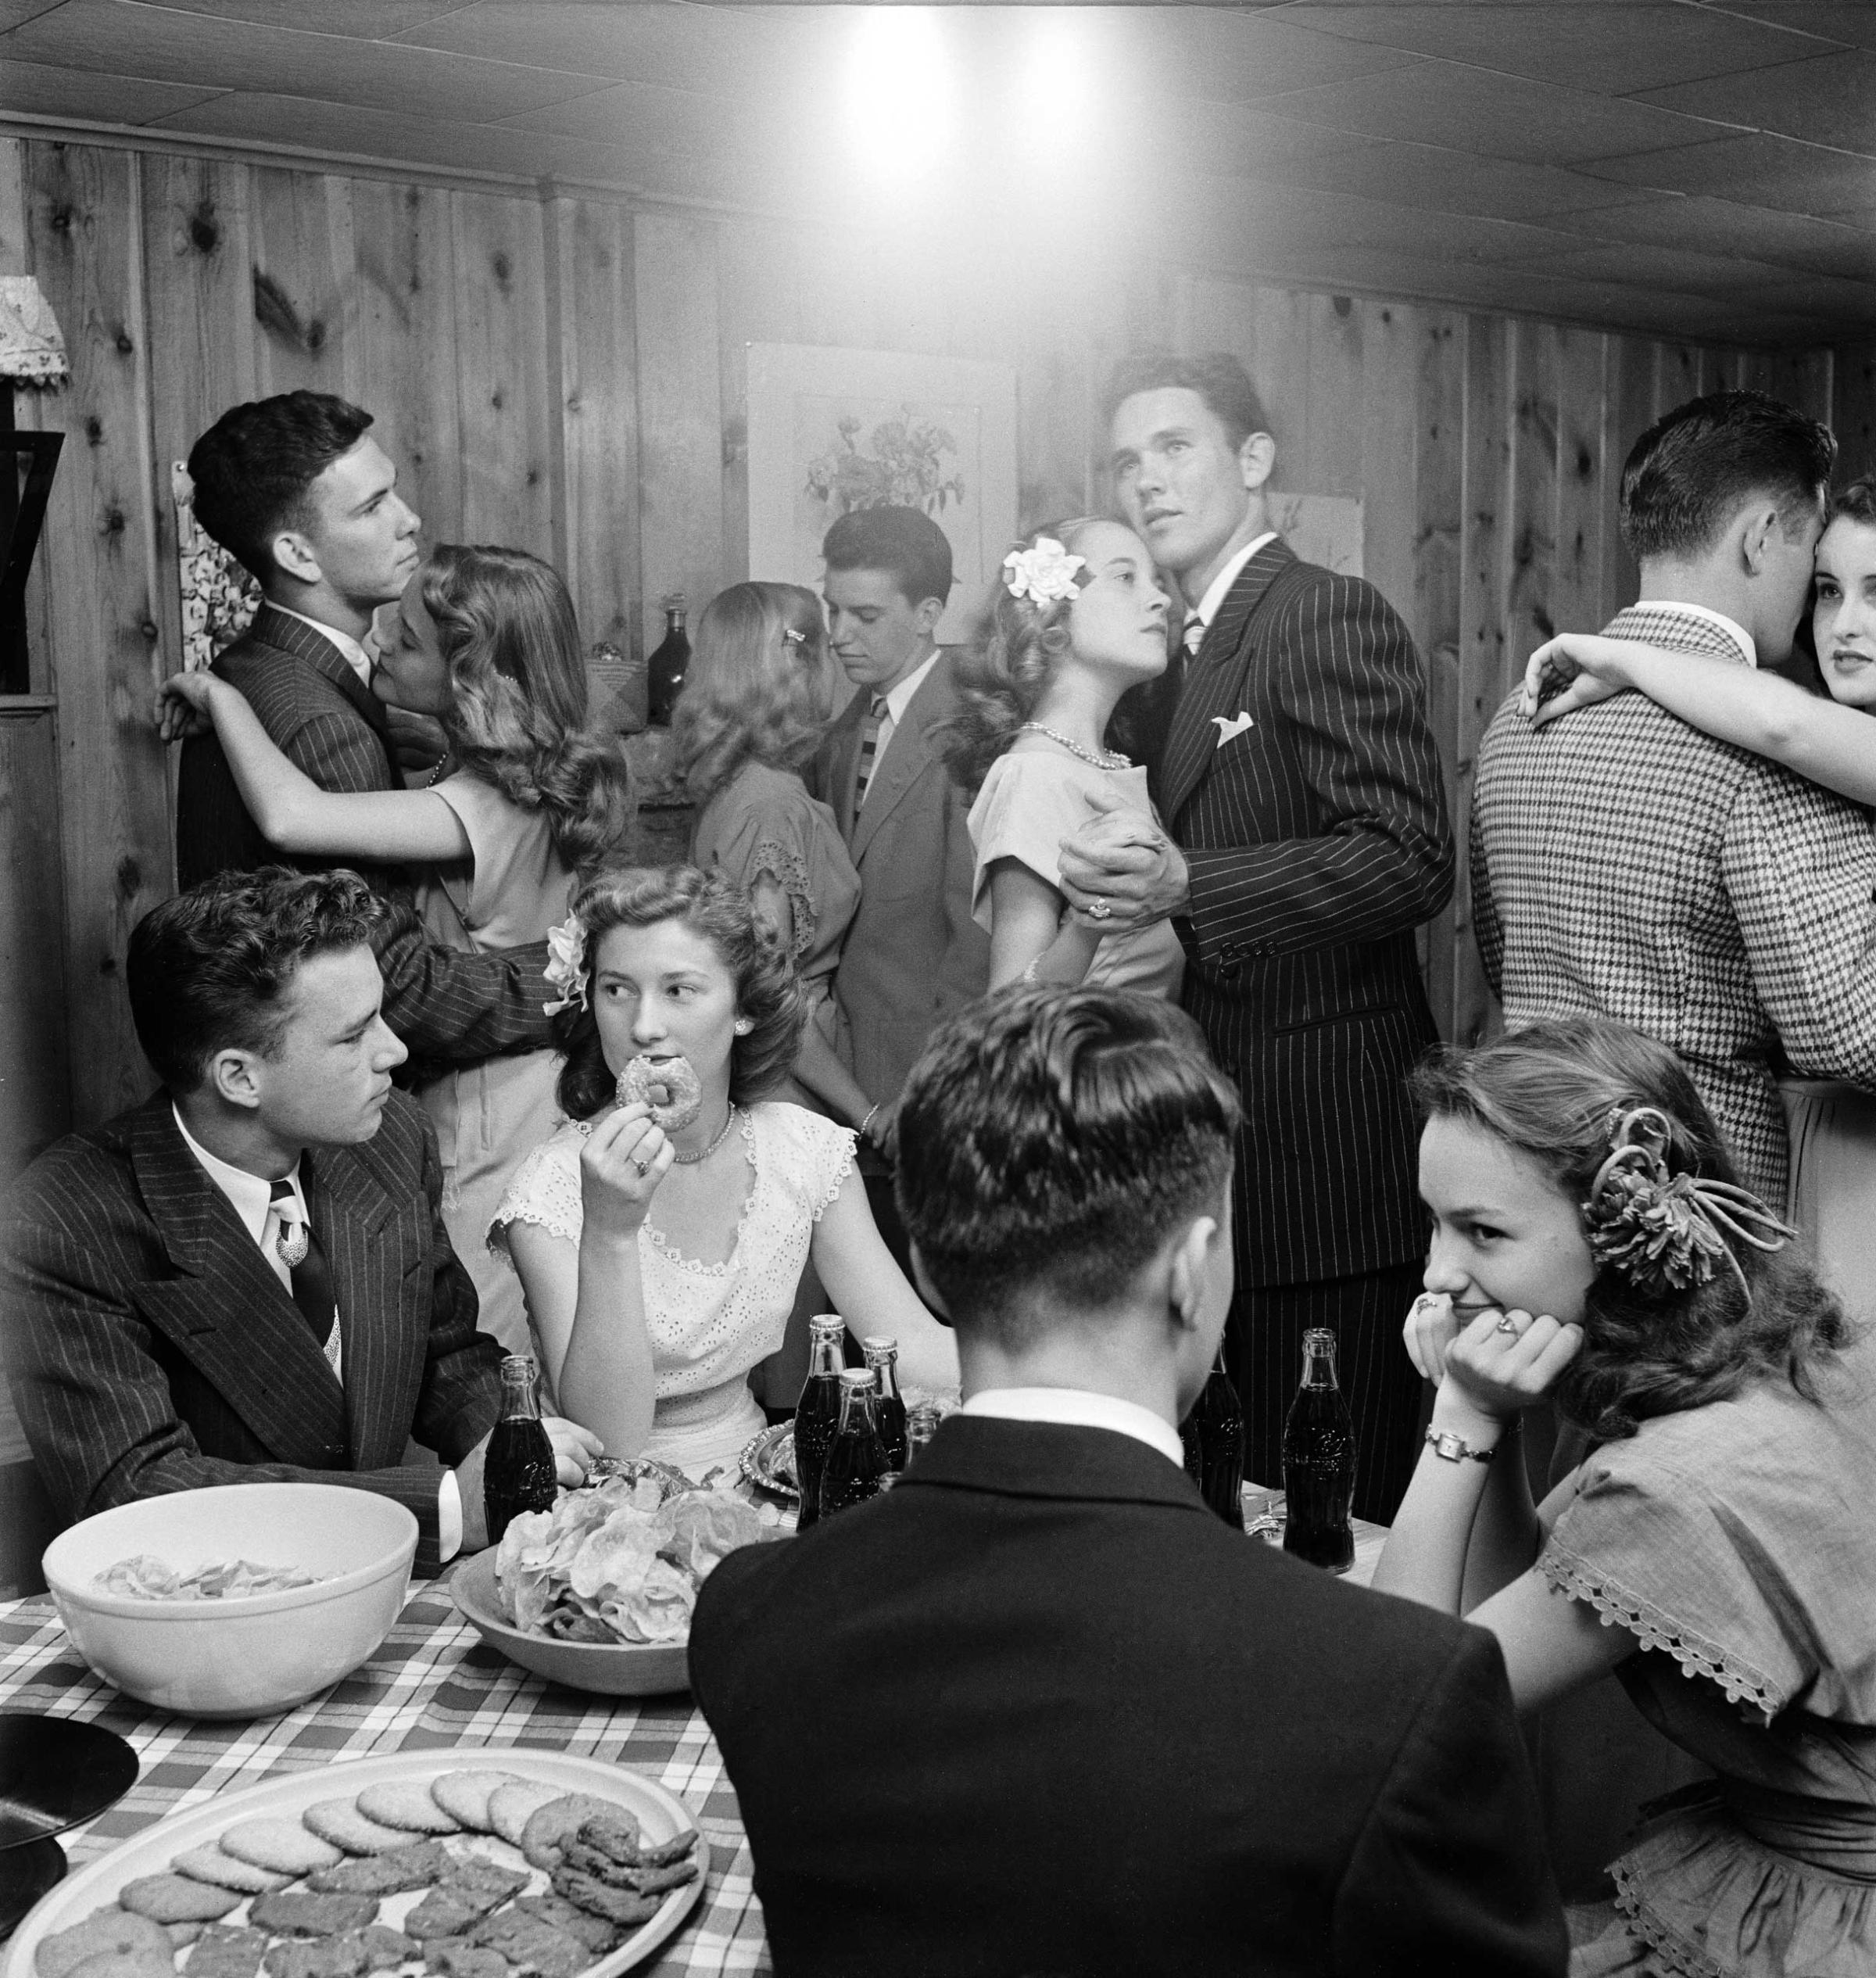 Teenagers at a party in 1947 in Tulsa, Oklahoma; LIFE reported that they "munch doughnuts and sip cokes whenever they are not dancing with serious faces to sentimental music."